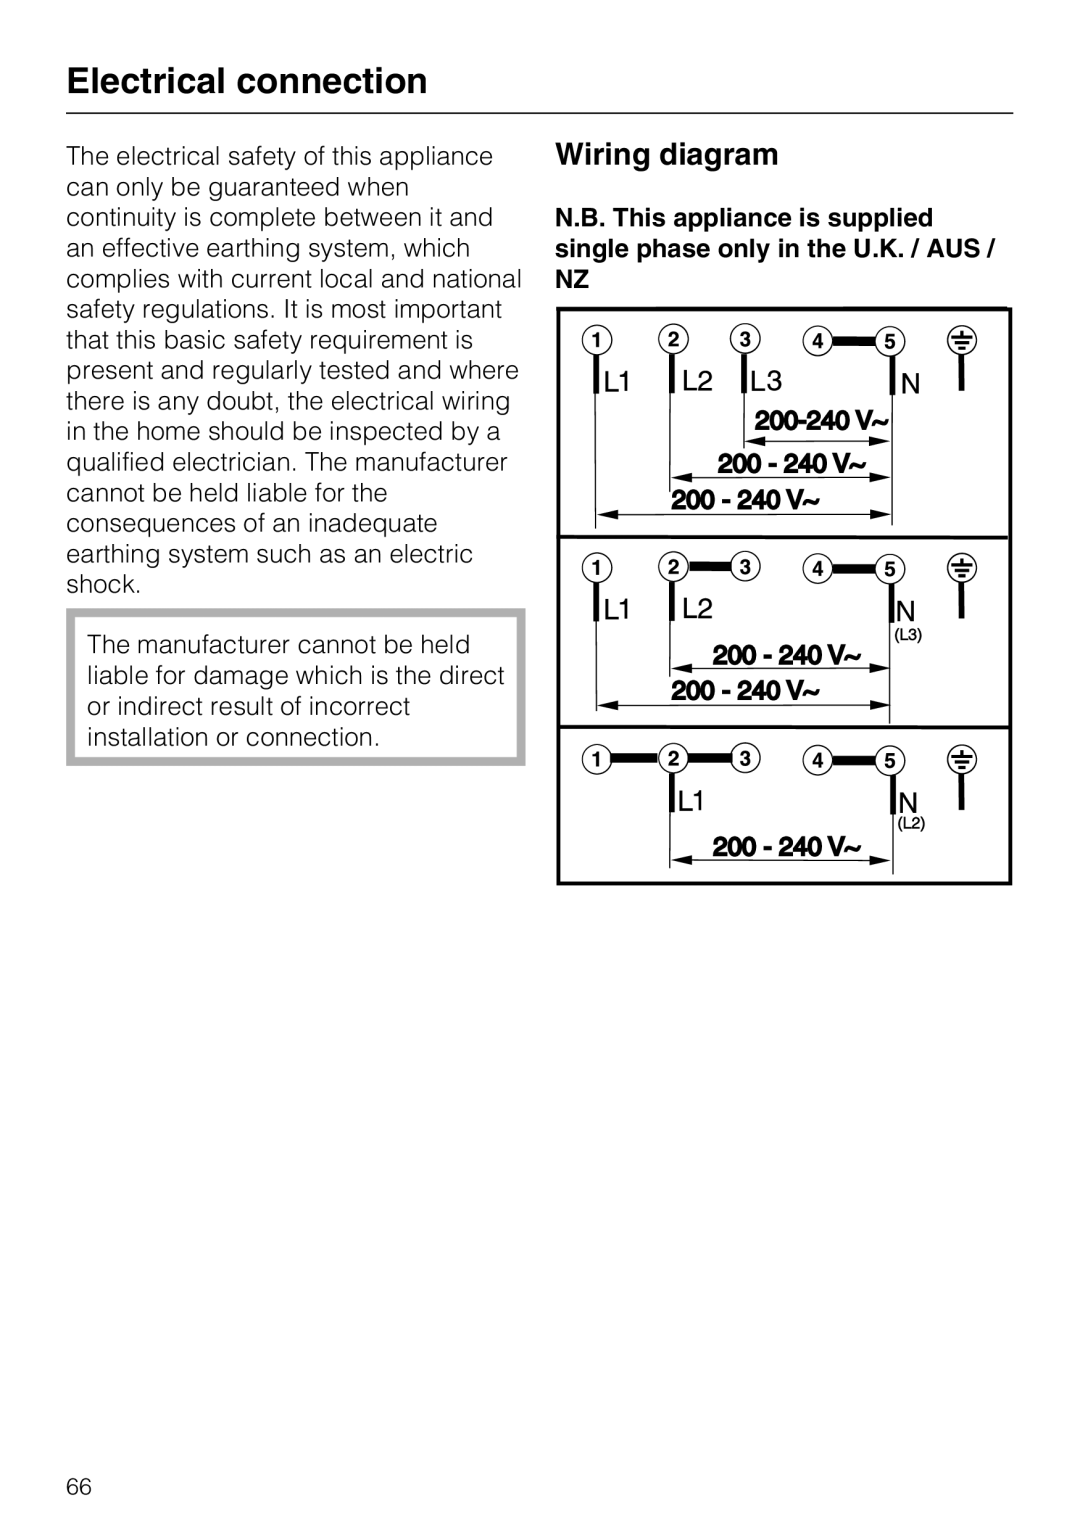 Miele KM6117 Wiring diagram, Electrical connection, N.B. This appliance is supplied single phase only in the U.K. / AUS 